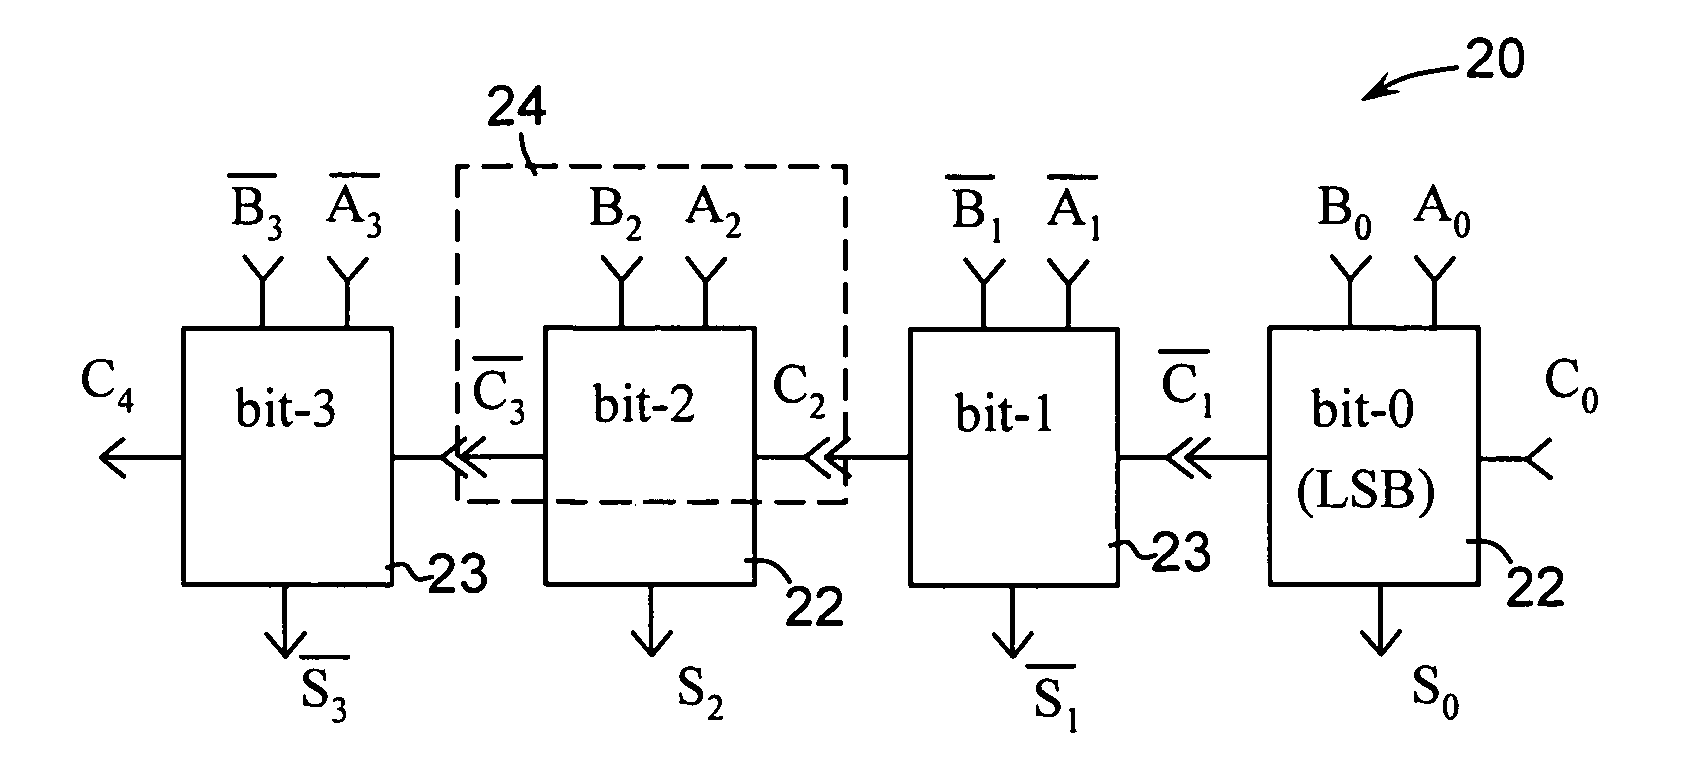 Inversion of alternate instruction and/or data bits in a computer